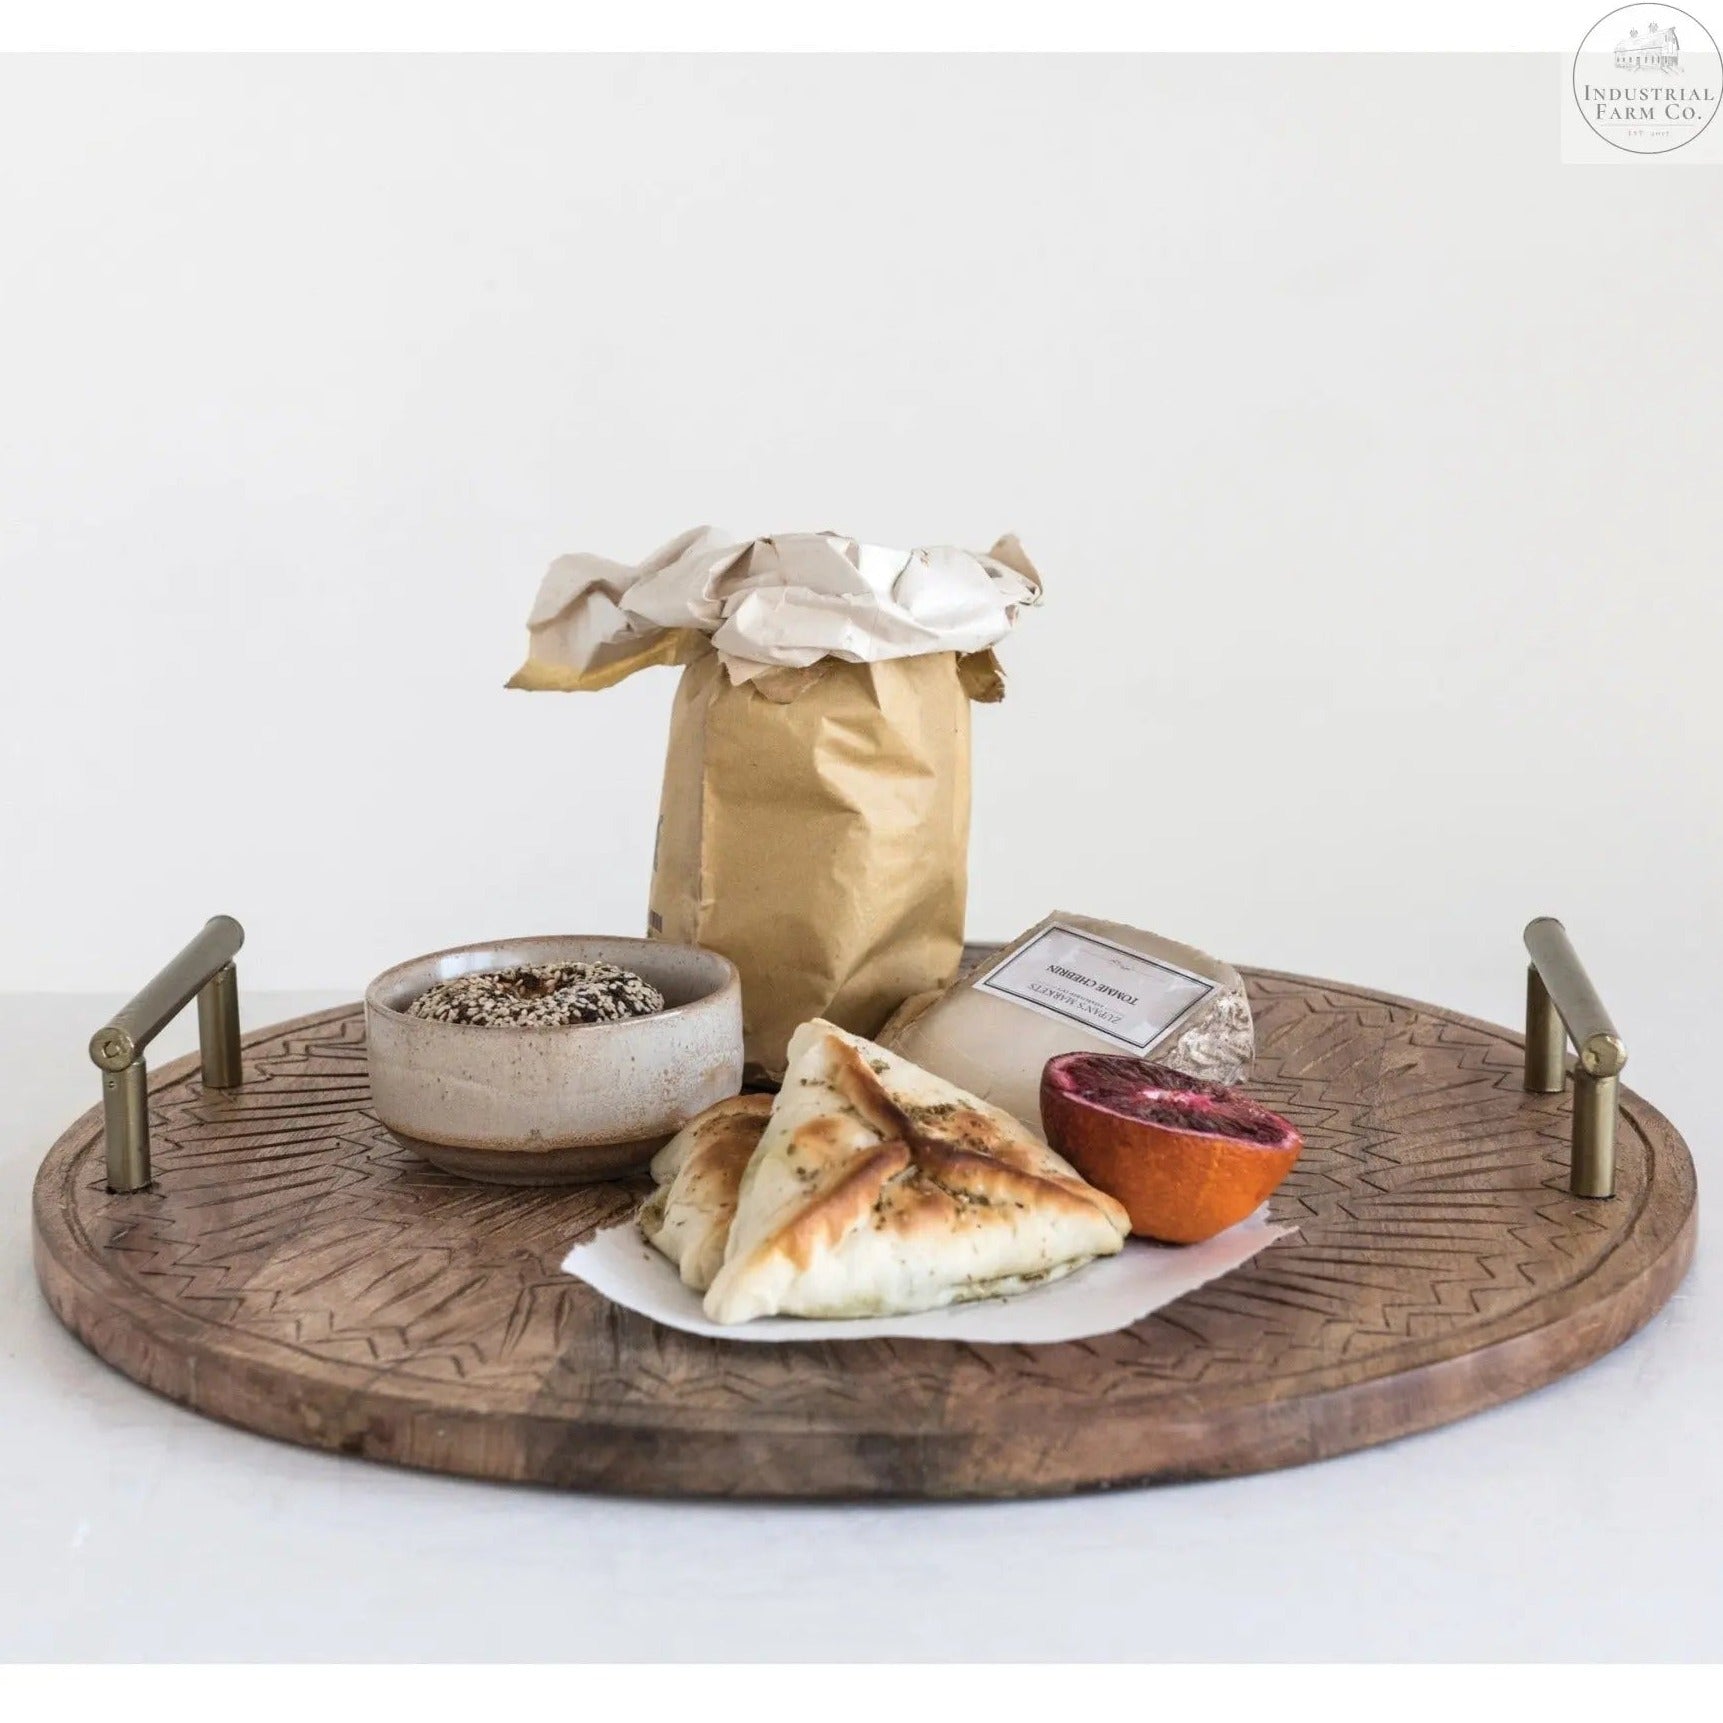 Hand Carved Mango Wood Tray With Handles | Industrial Farm Co